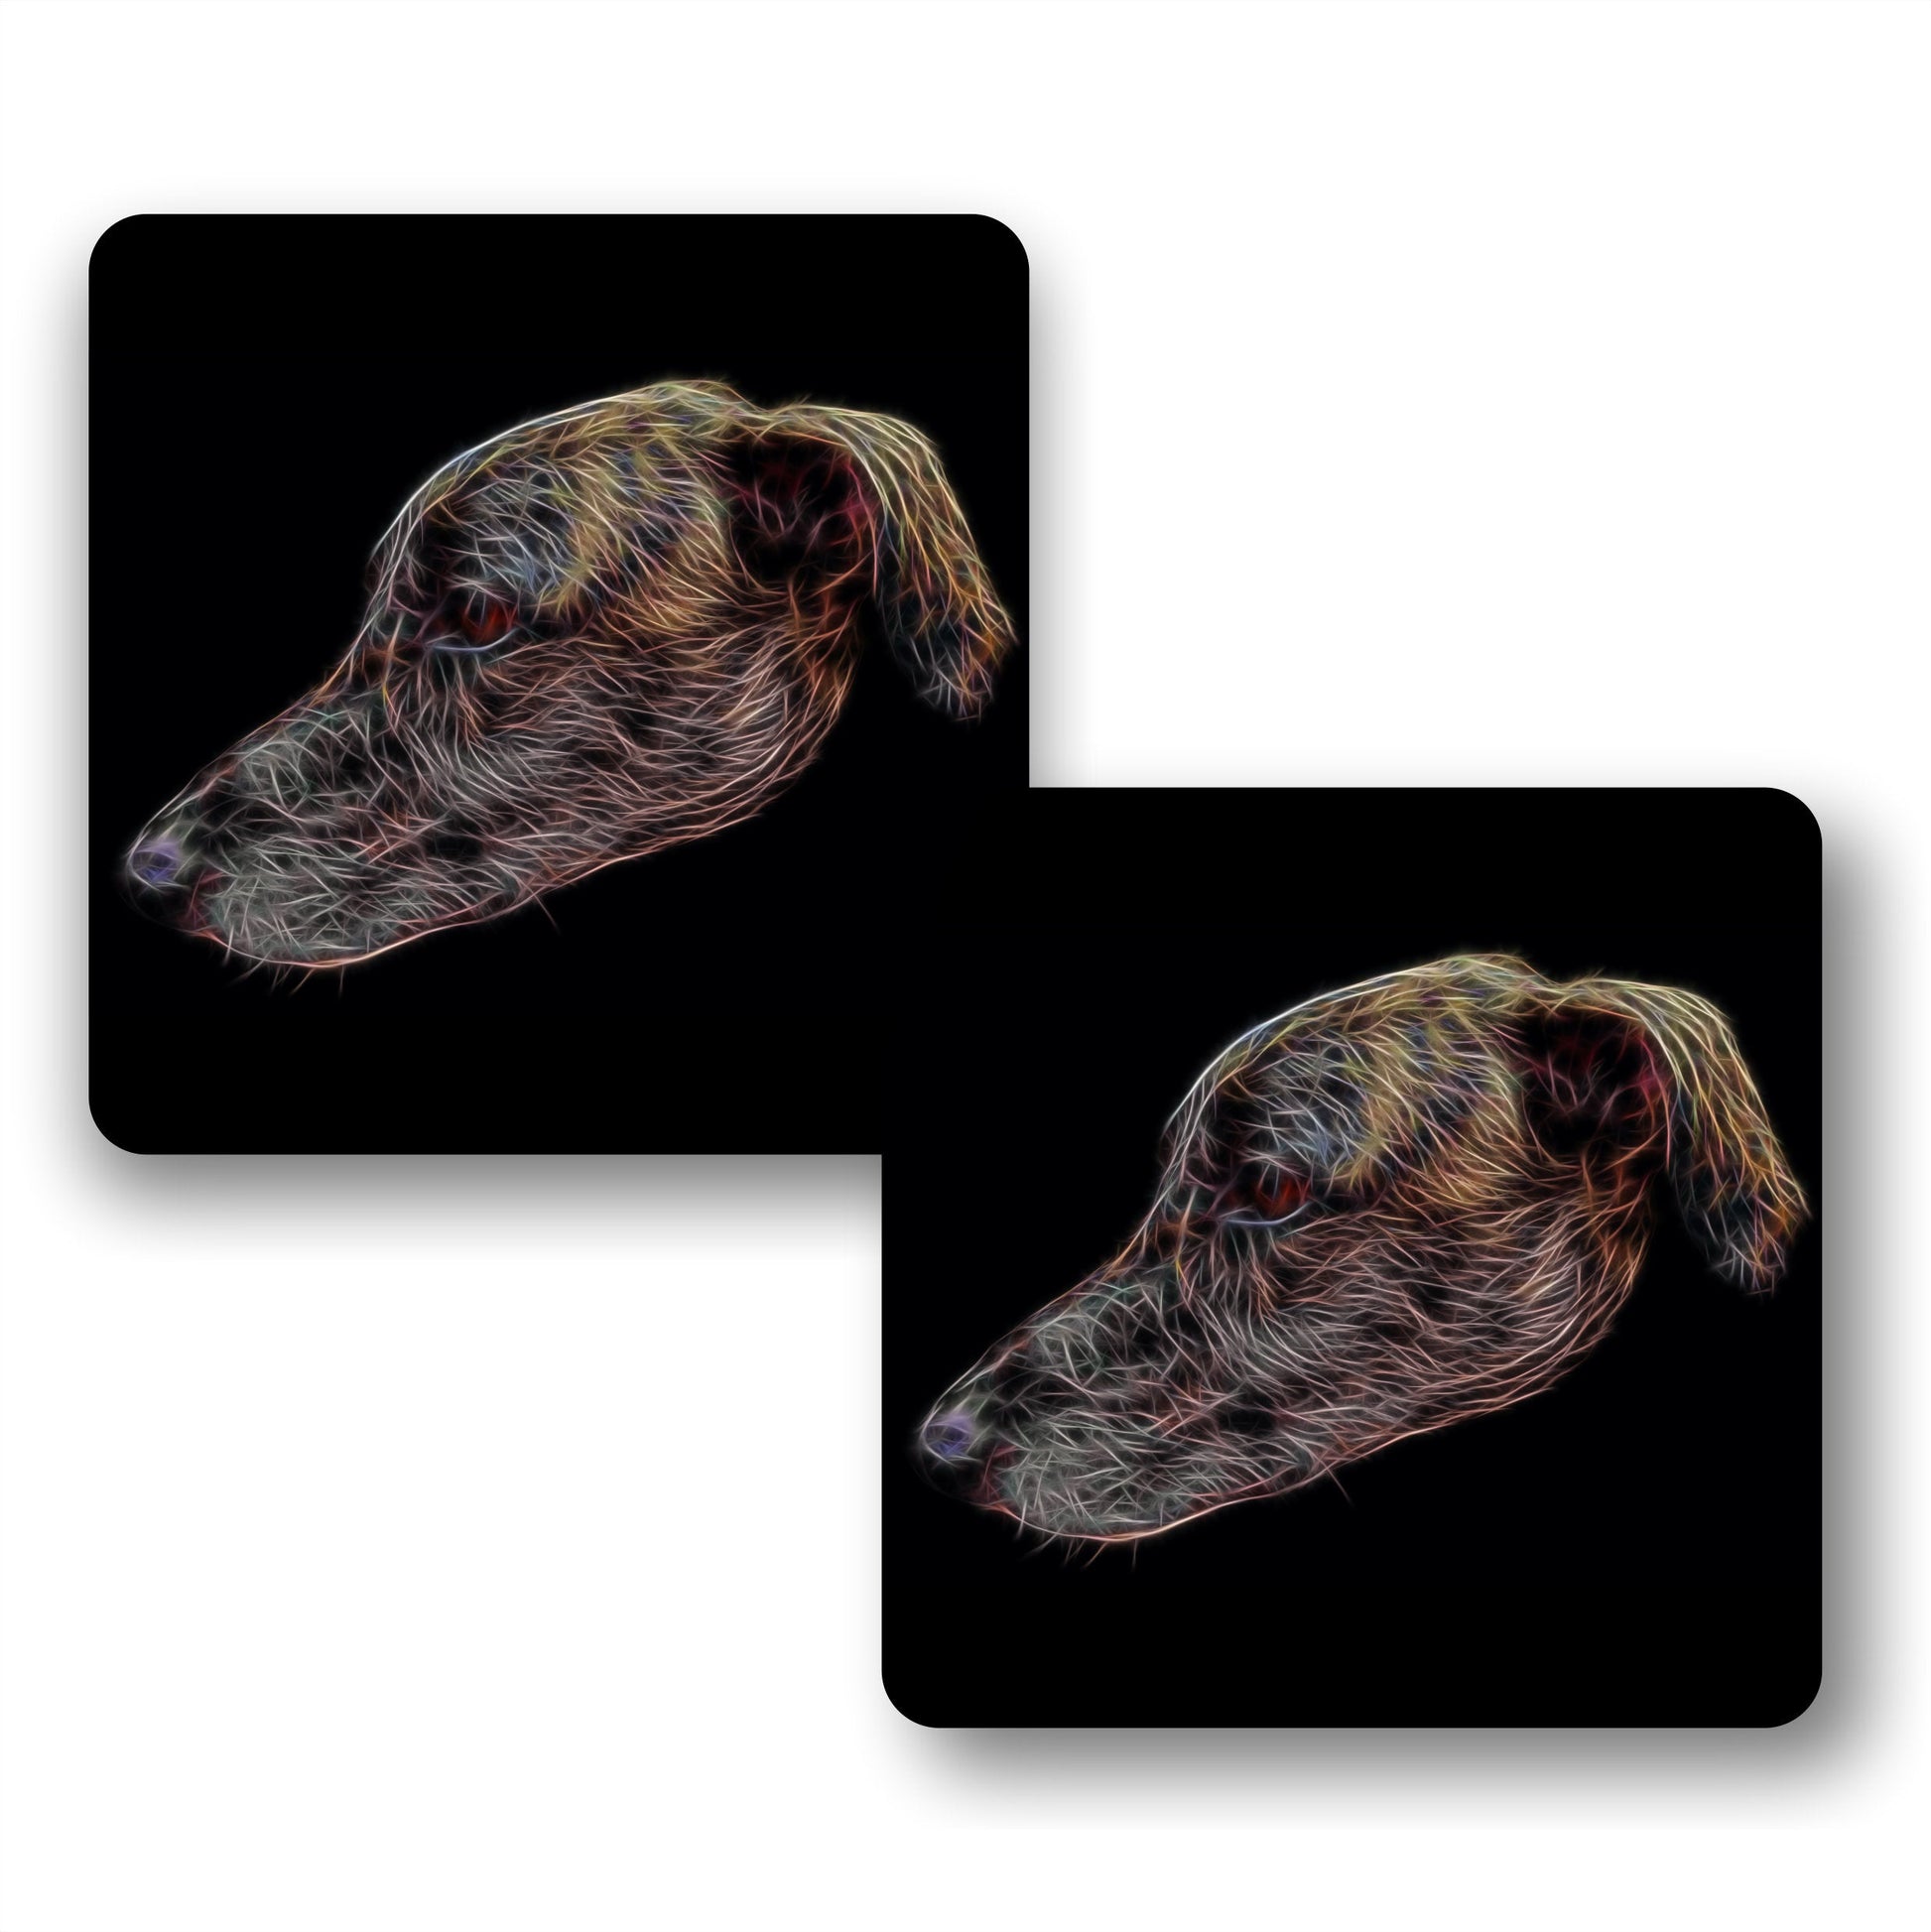 Brindle Lurcher Coasters, Set of 2, with Stunning Fractal Art Design.